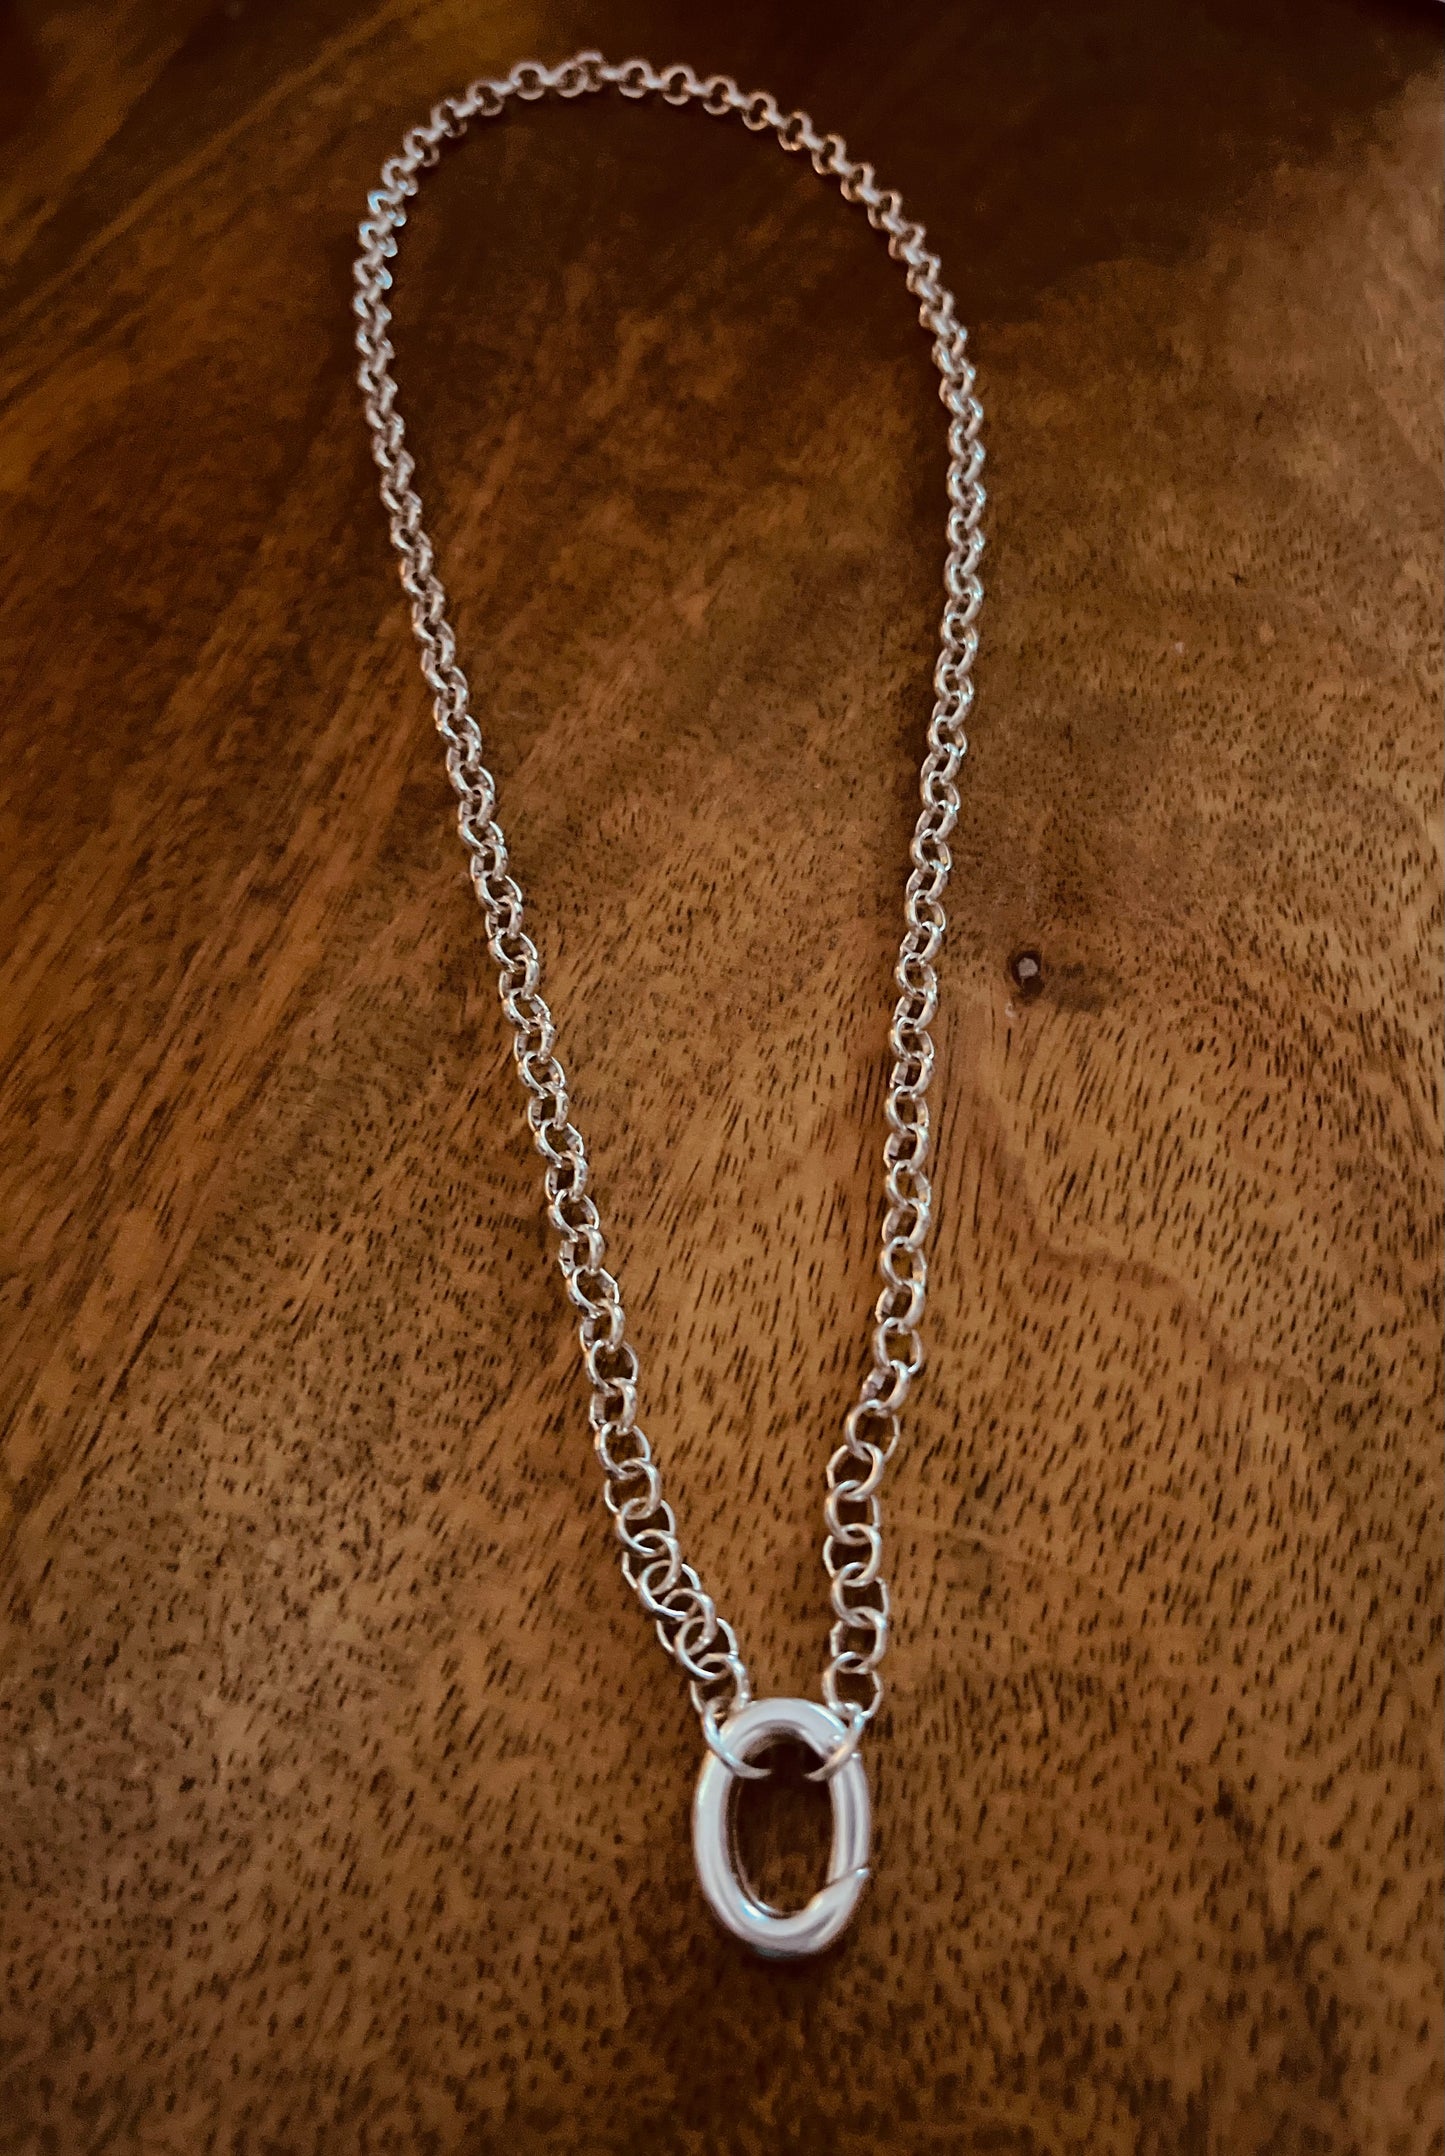 Silver rolo chain with connector